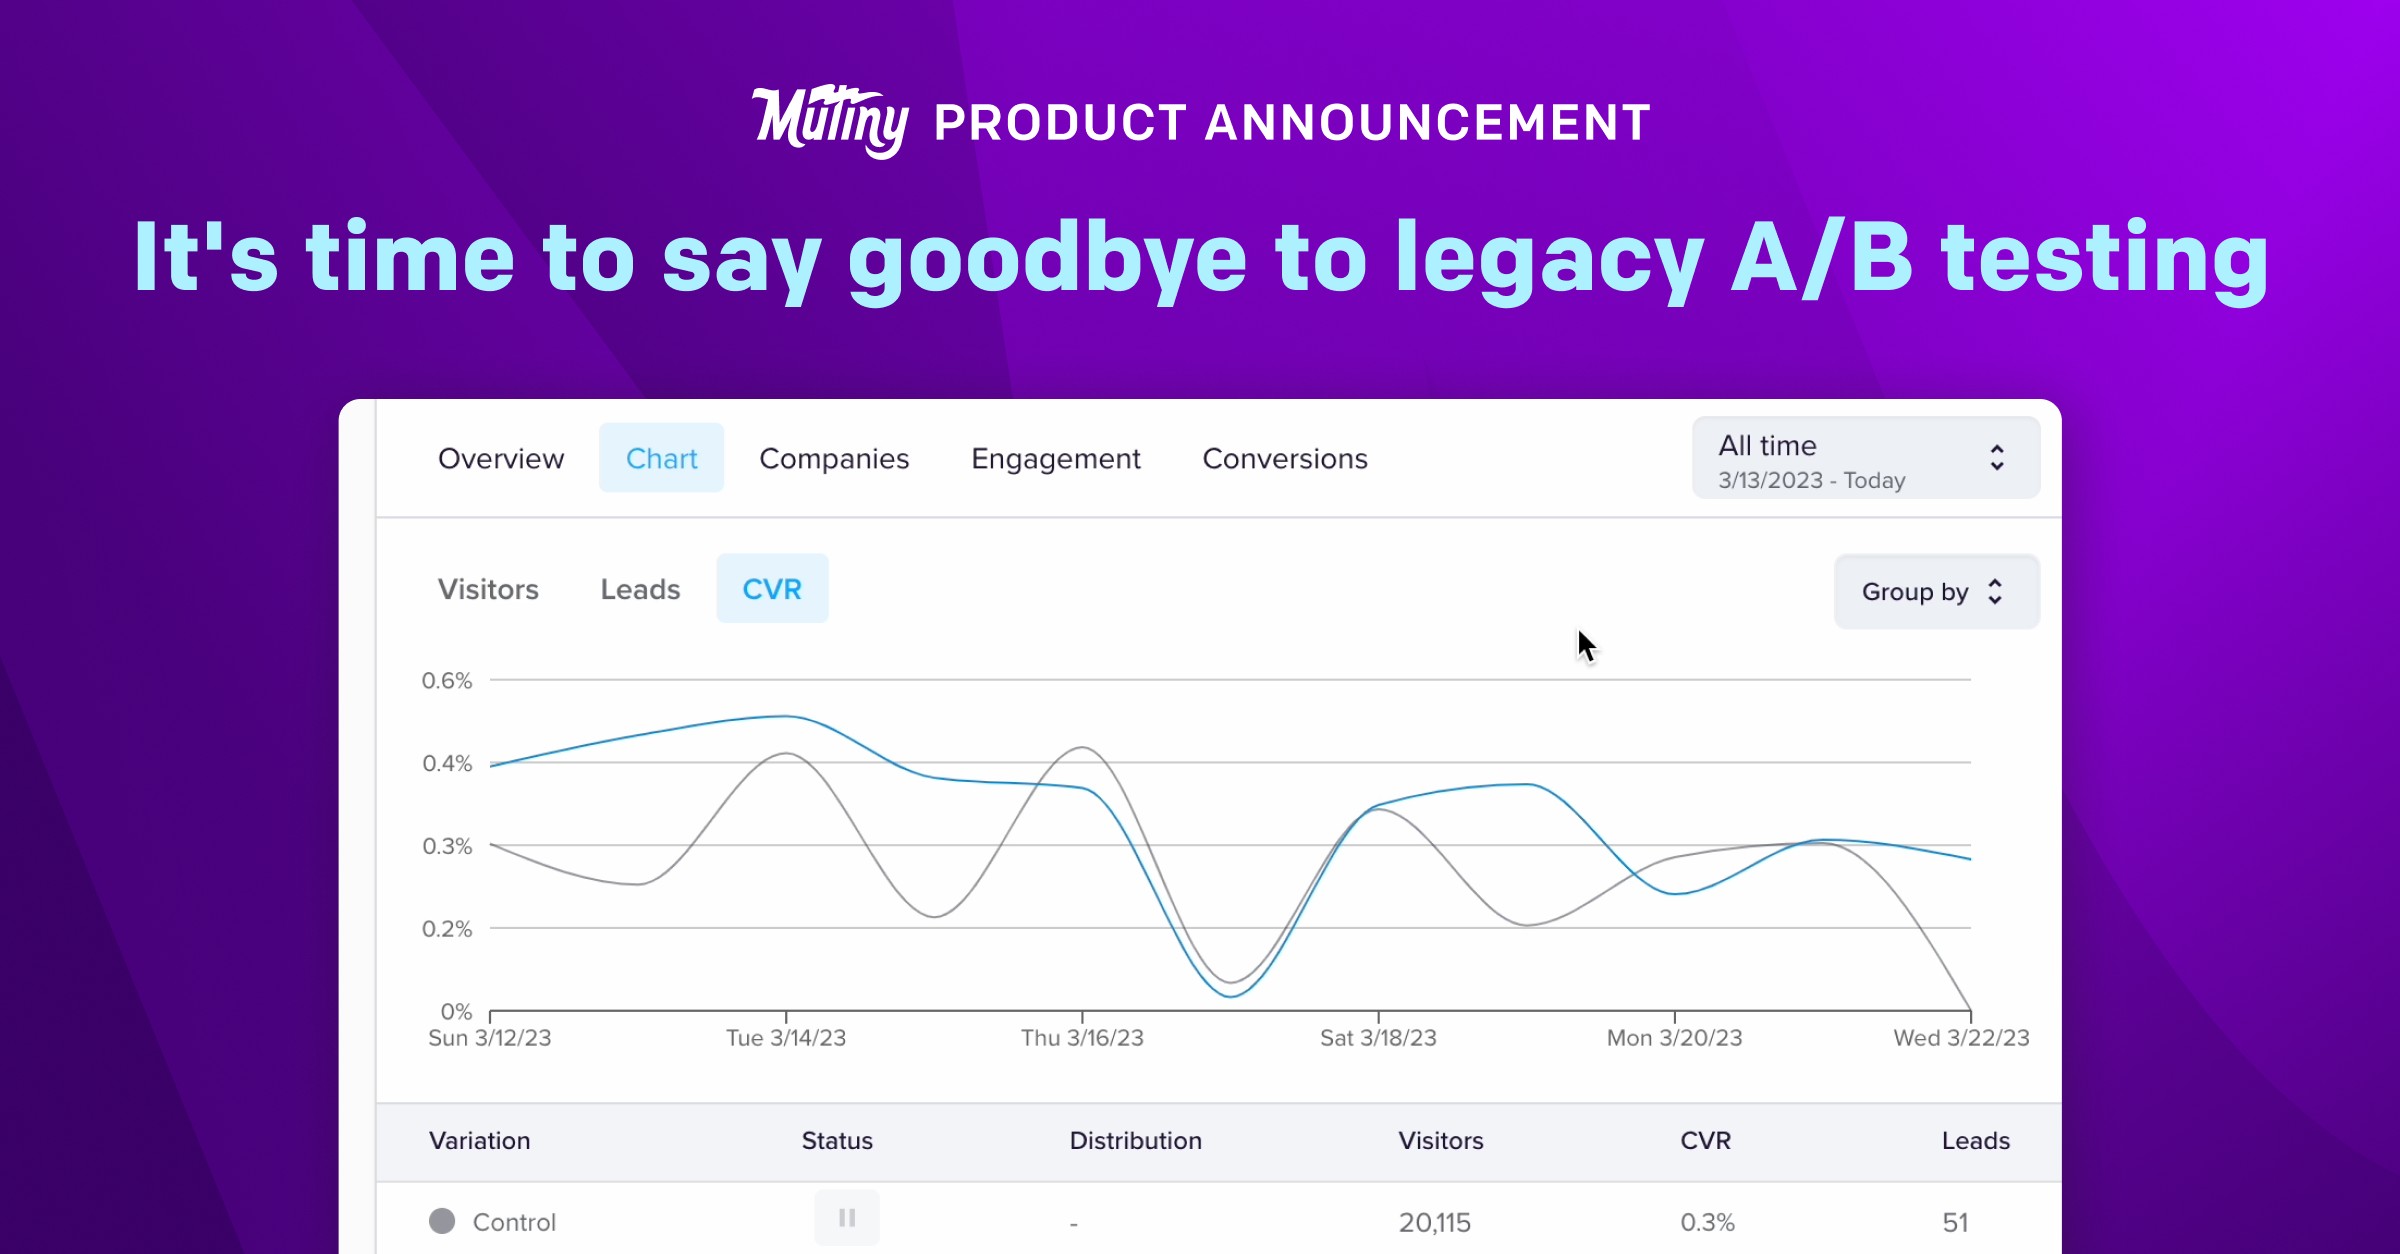 It’s time to say goodbye to legacy A/B testing